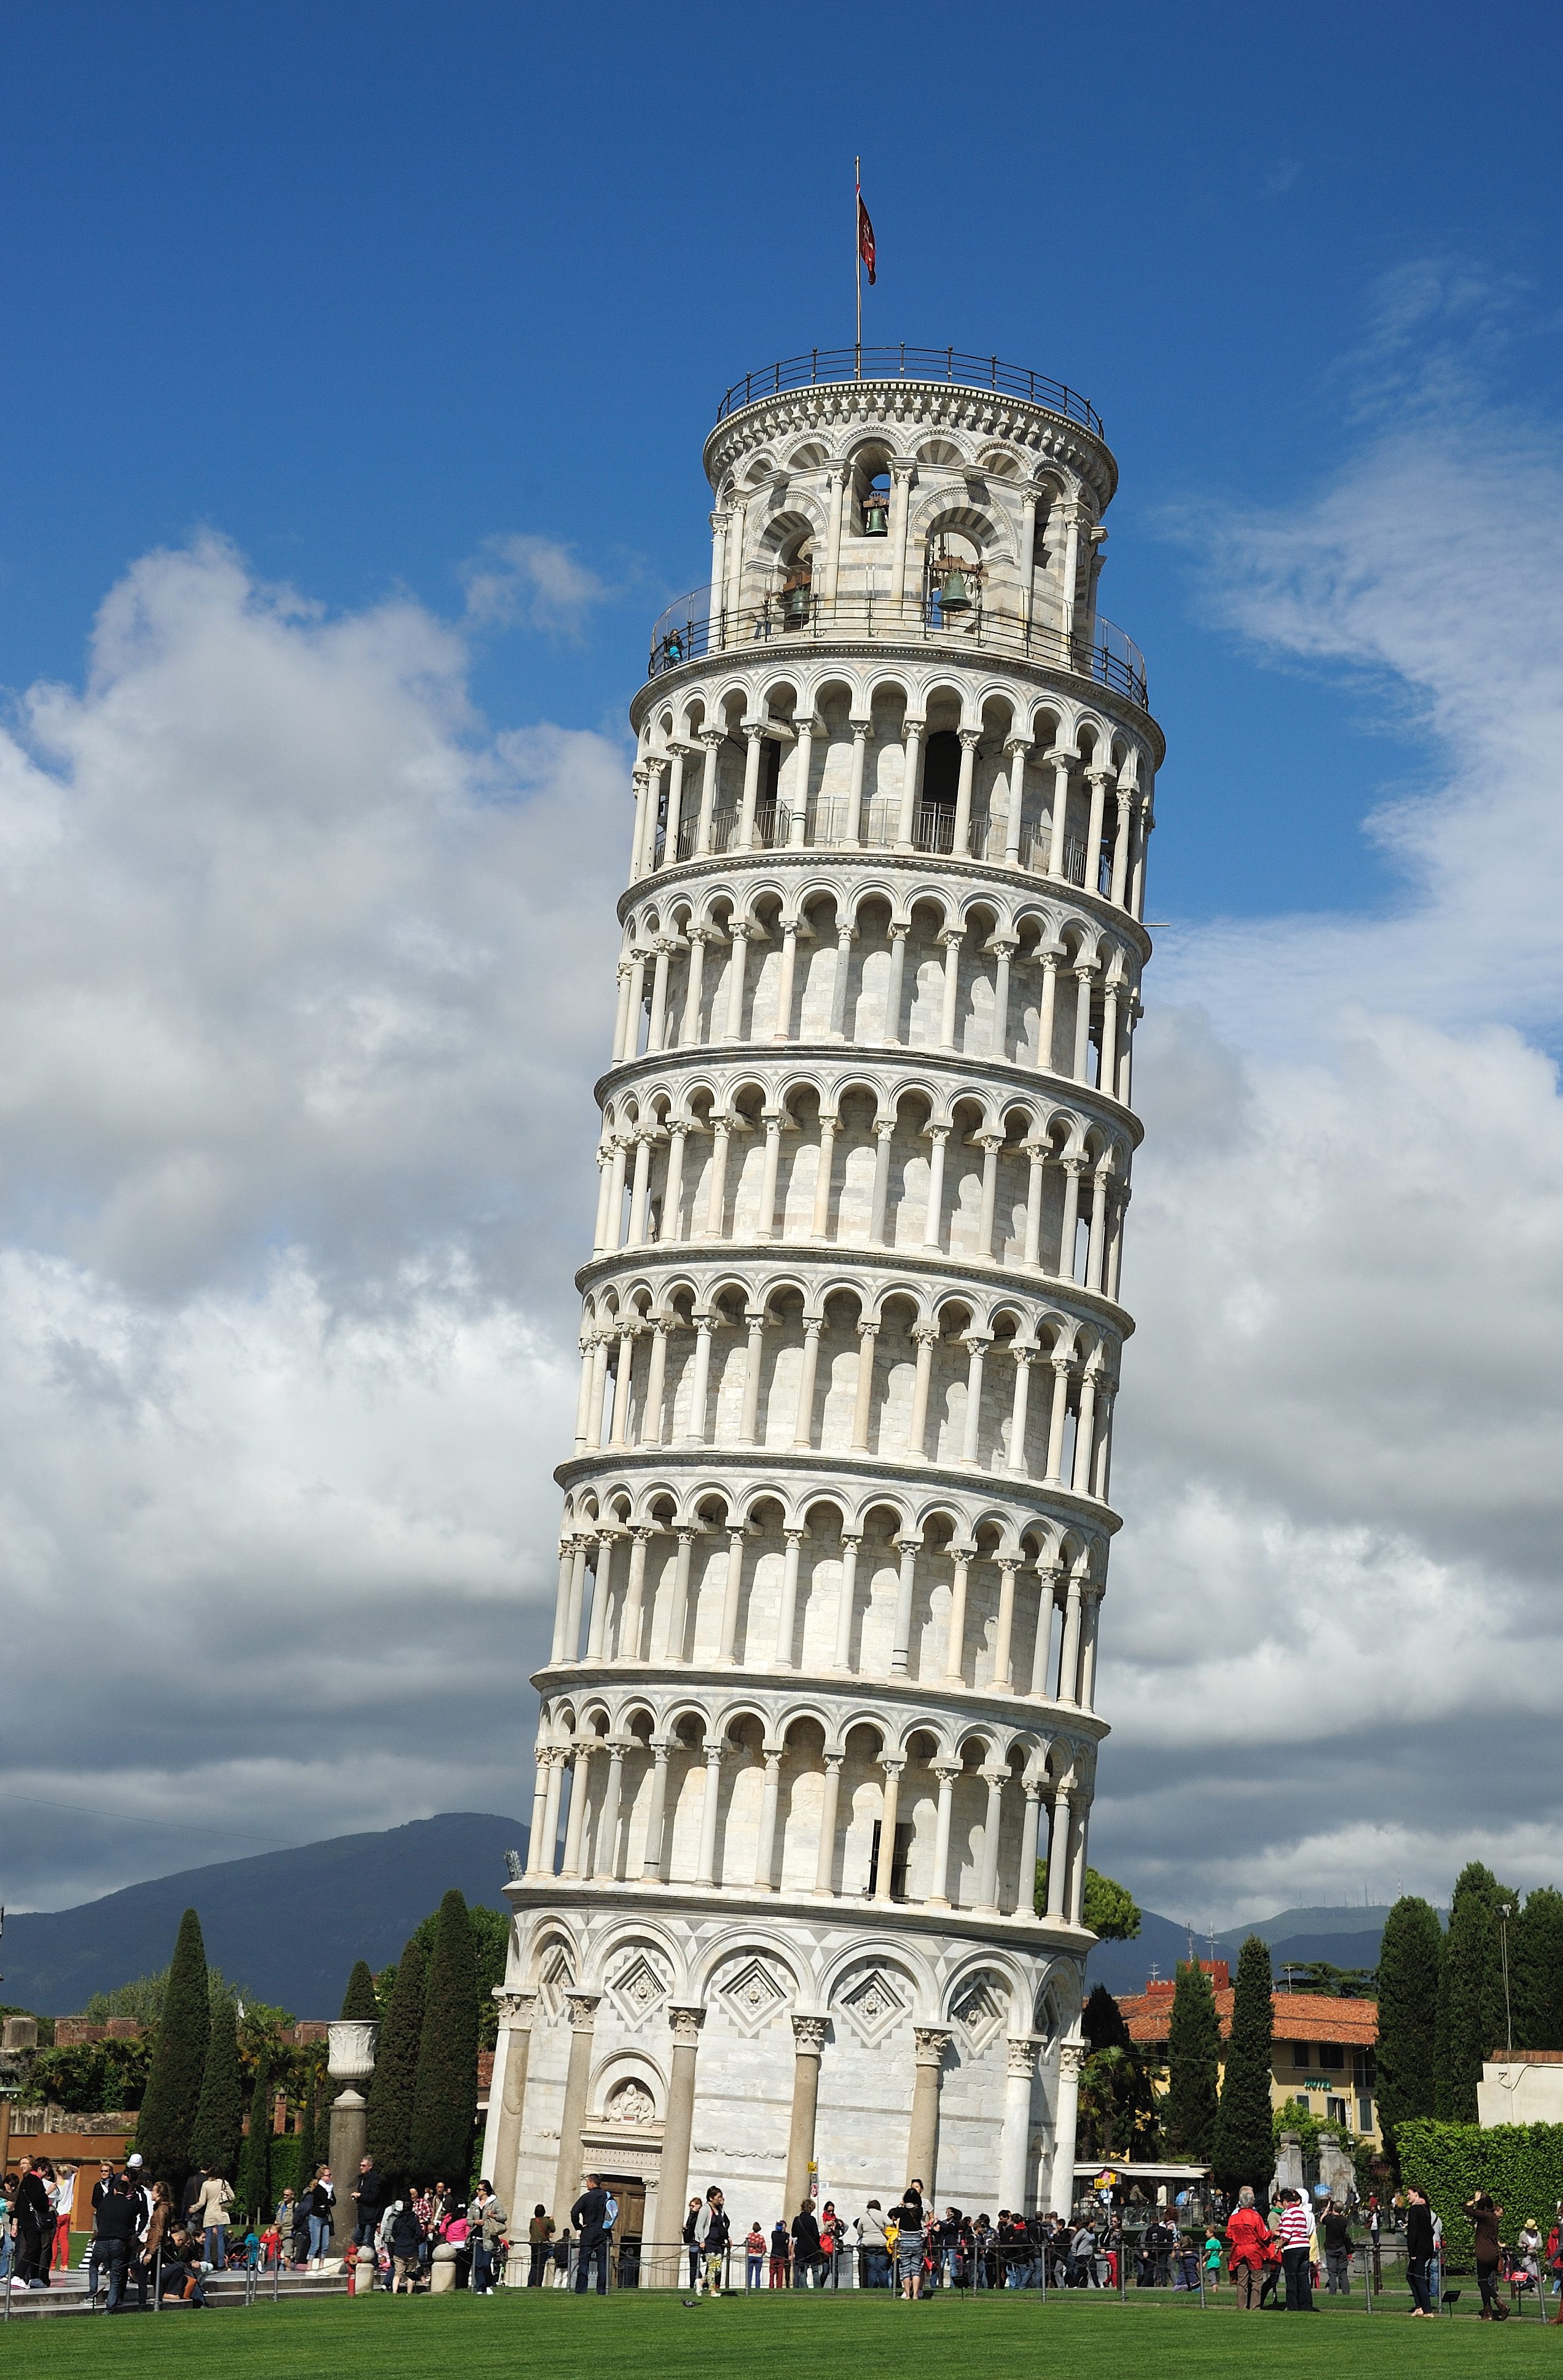 The_Leaning_Tower_of_Pisa_SB.jpeg